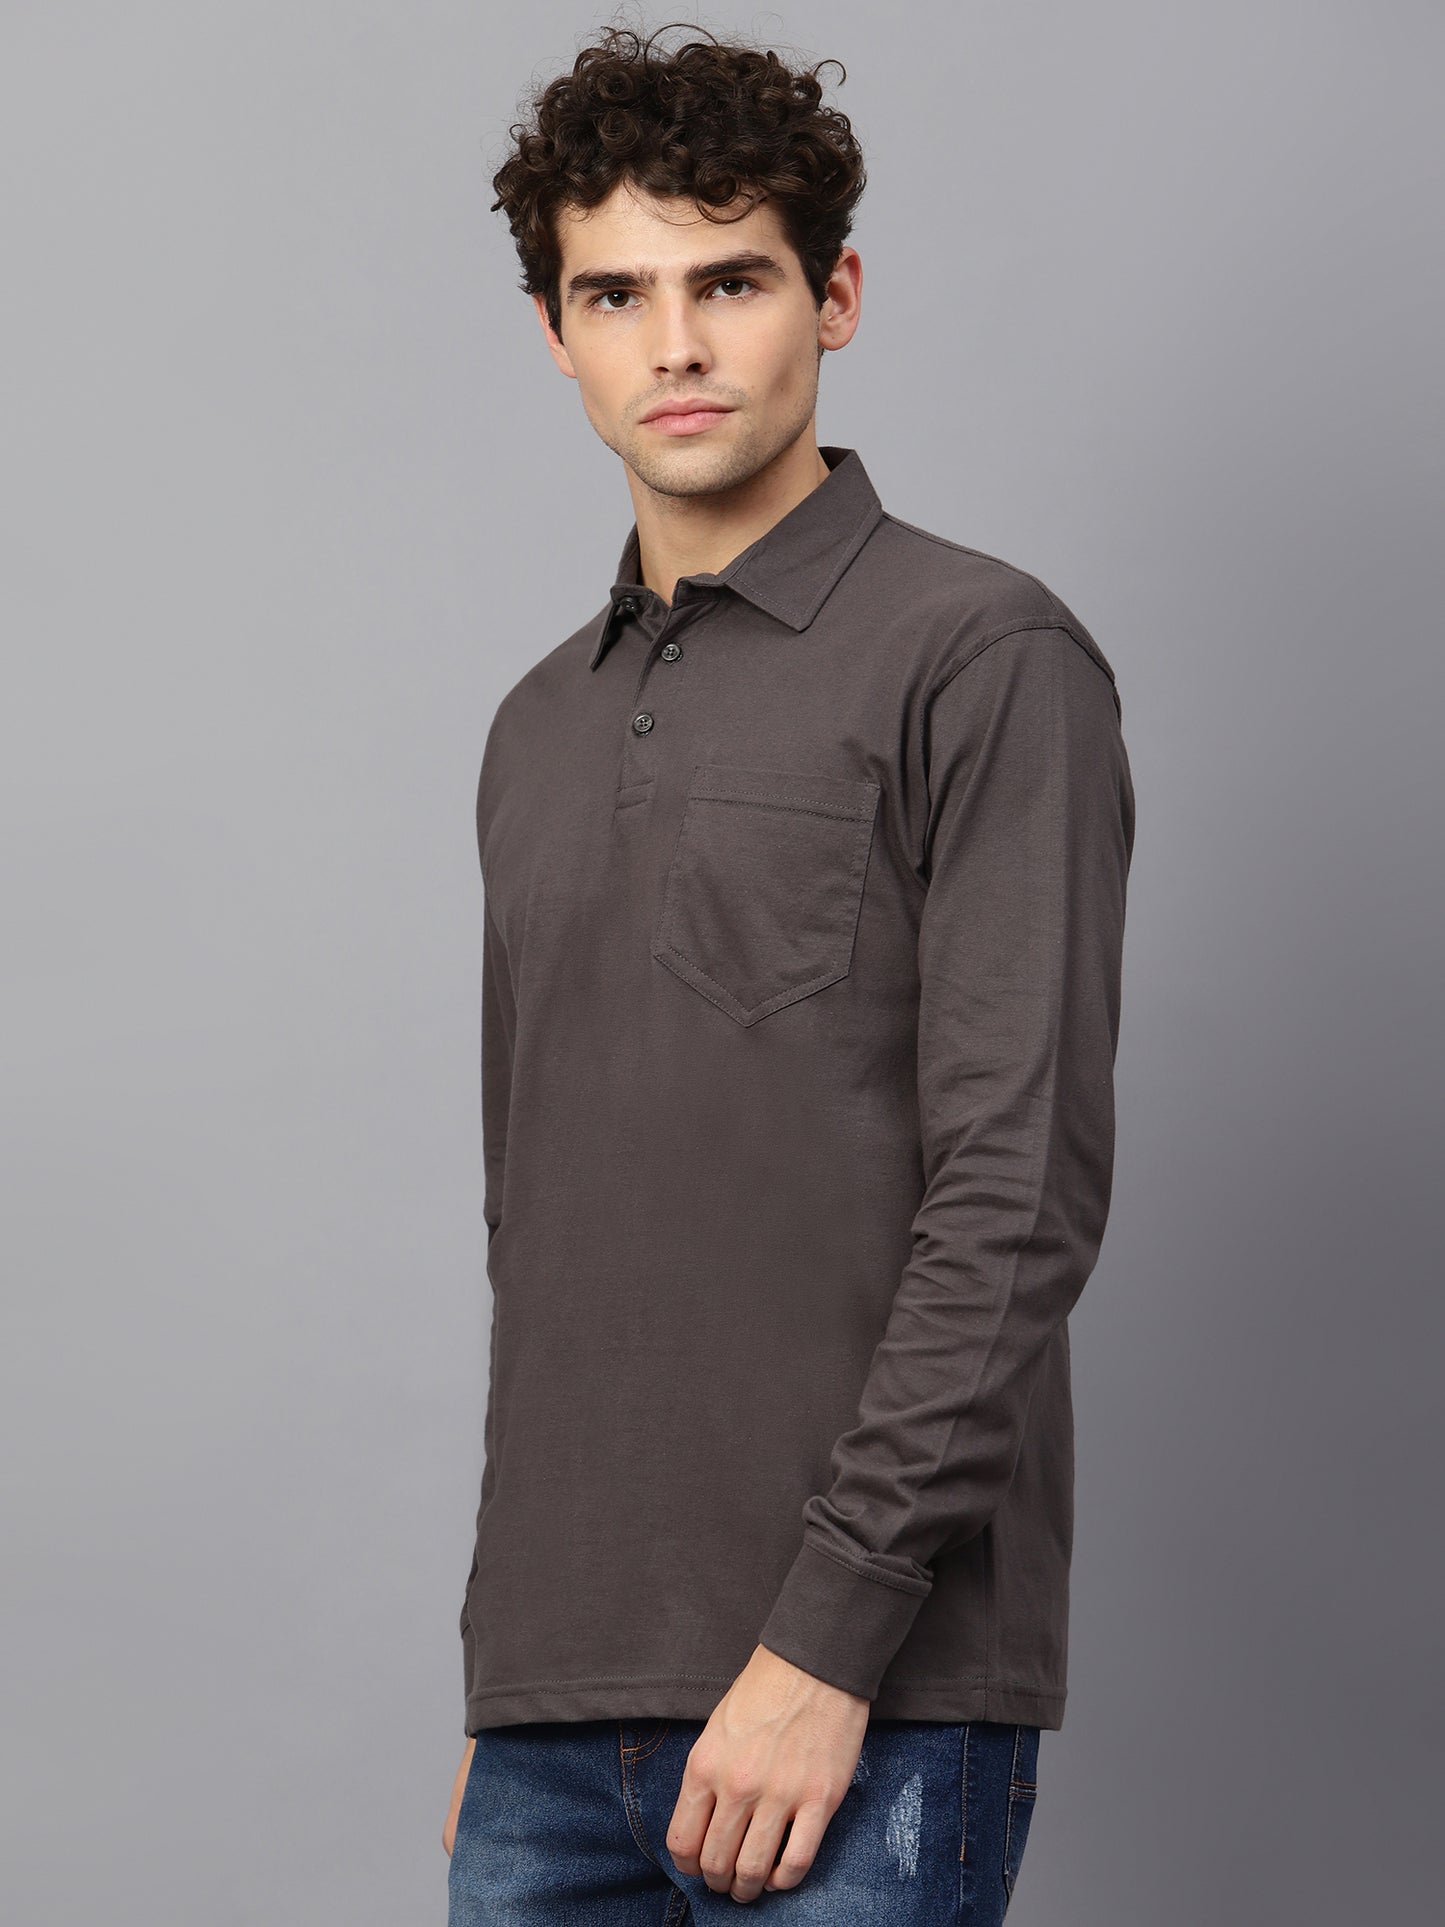 Men's Polo Neck Full Sleeve T-Shirt Pick any 2, 4, 5, 8, 10 Pieces